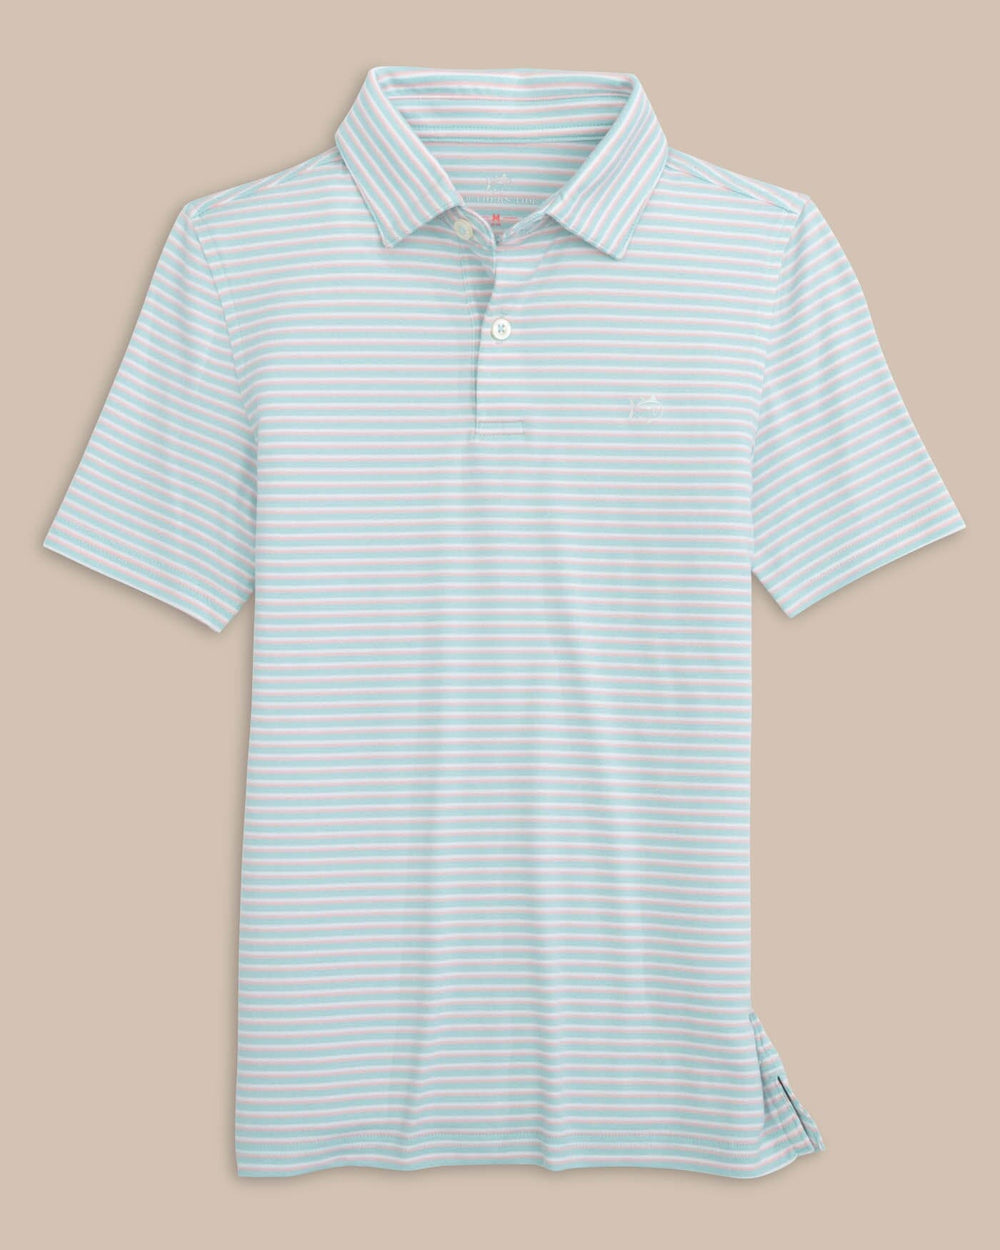 The front view of the Southern Tide Kids Ryder Heather Halls Stripe Performance Polo by Southern Tide - Heather Wake Blue